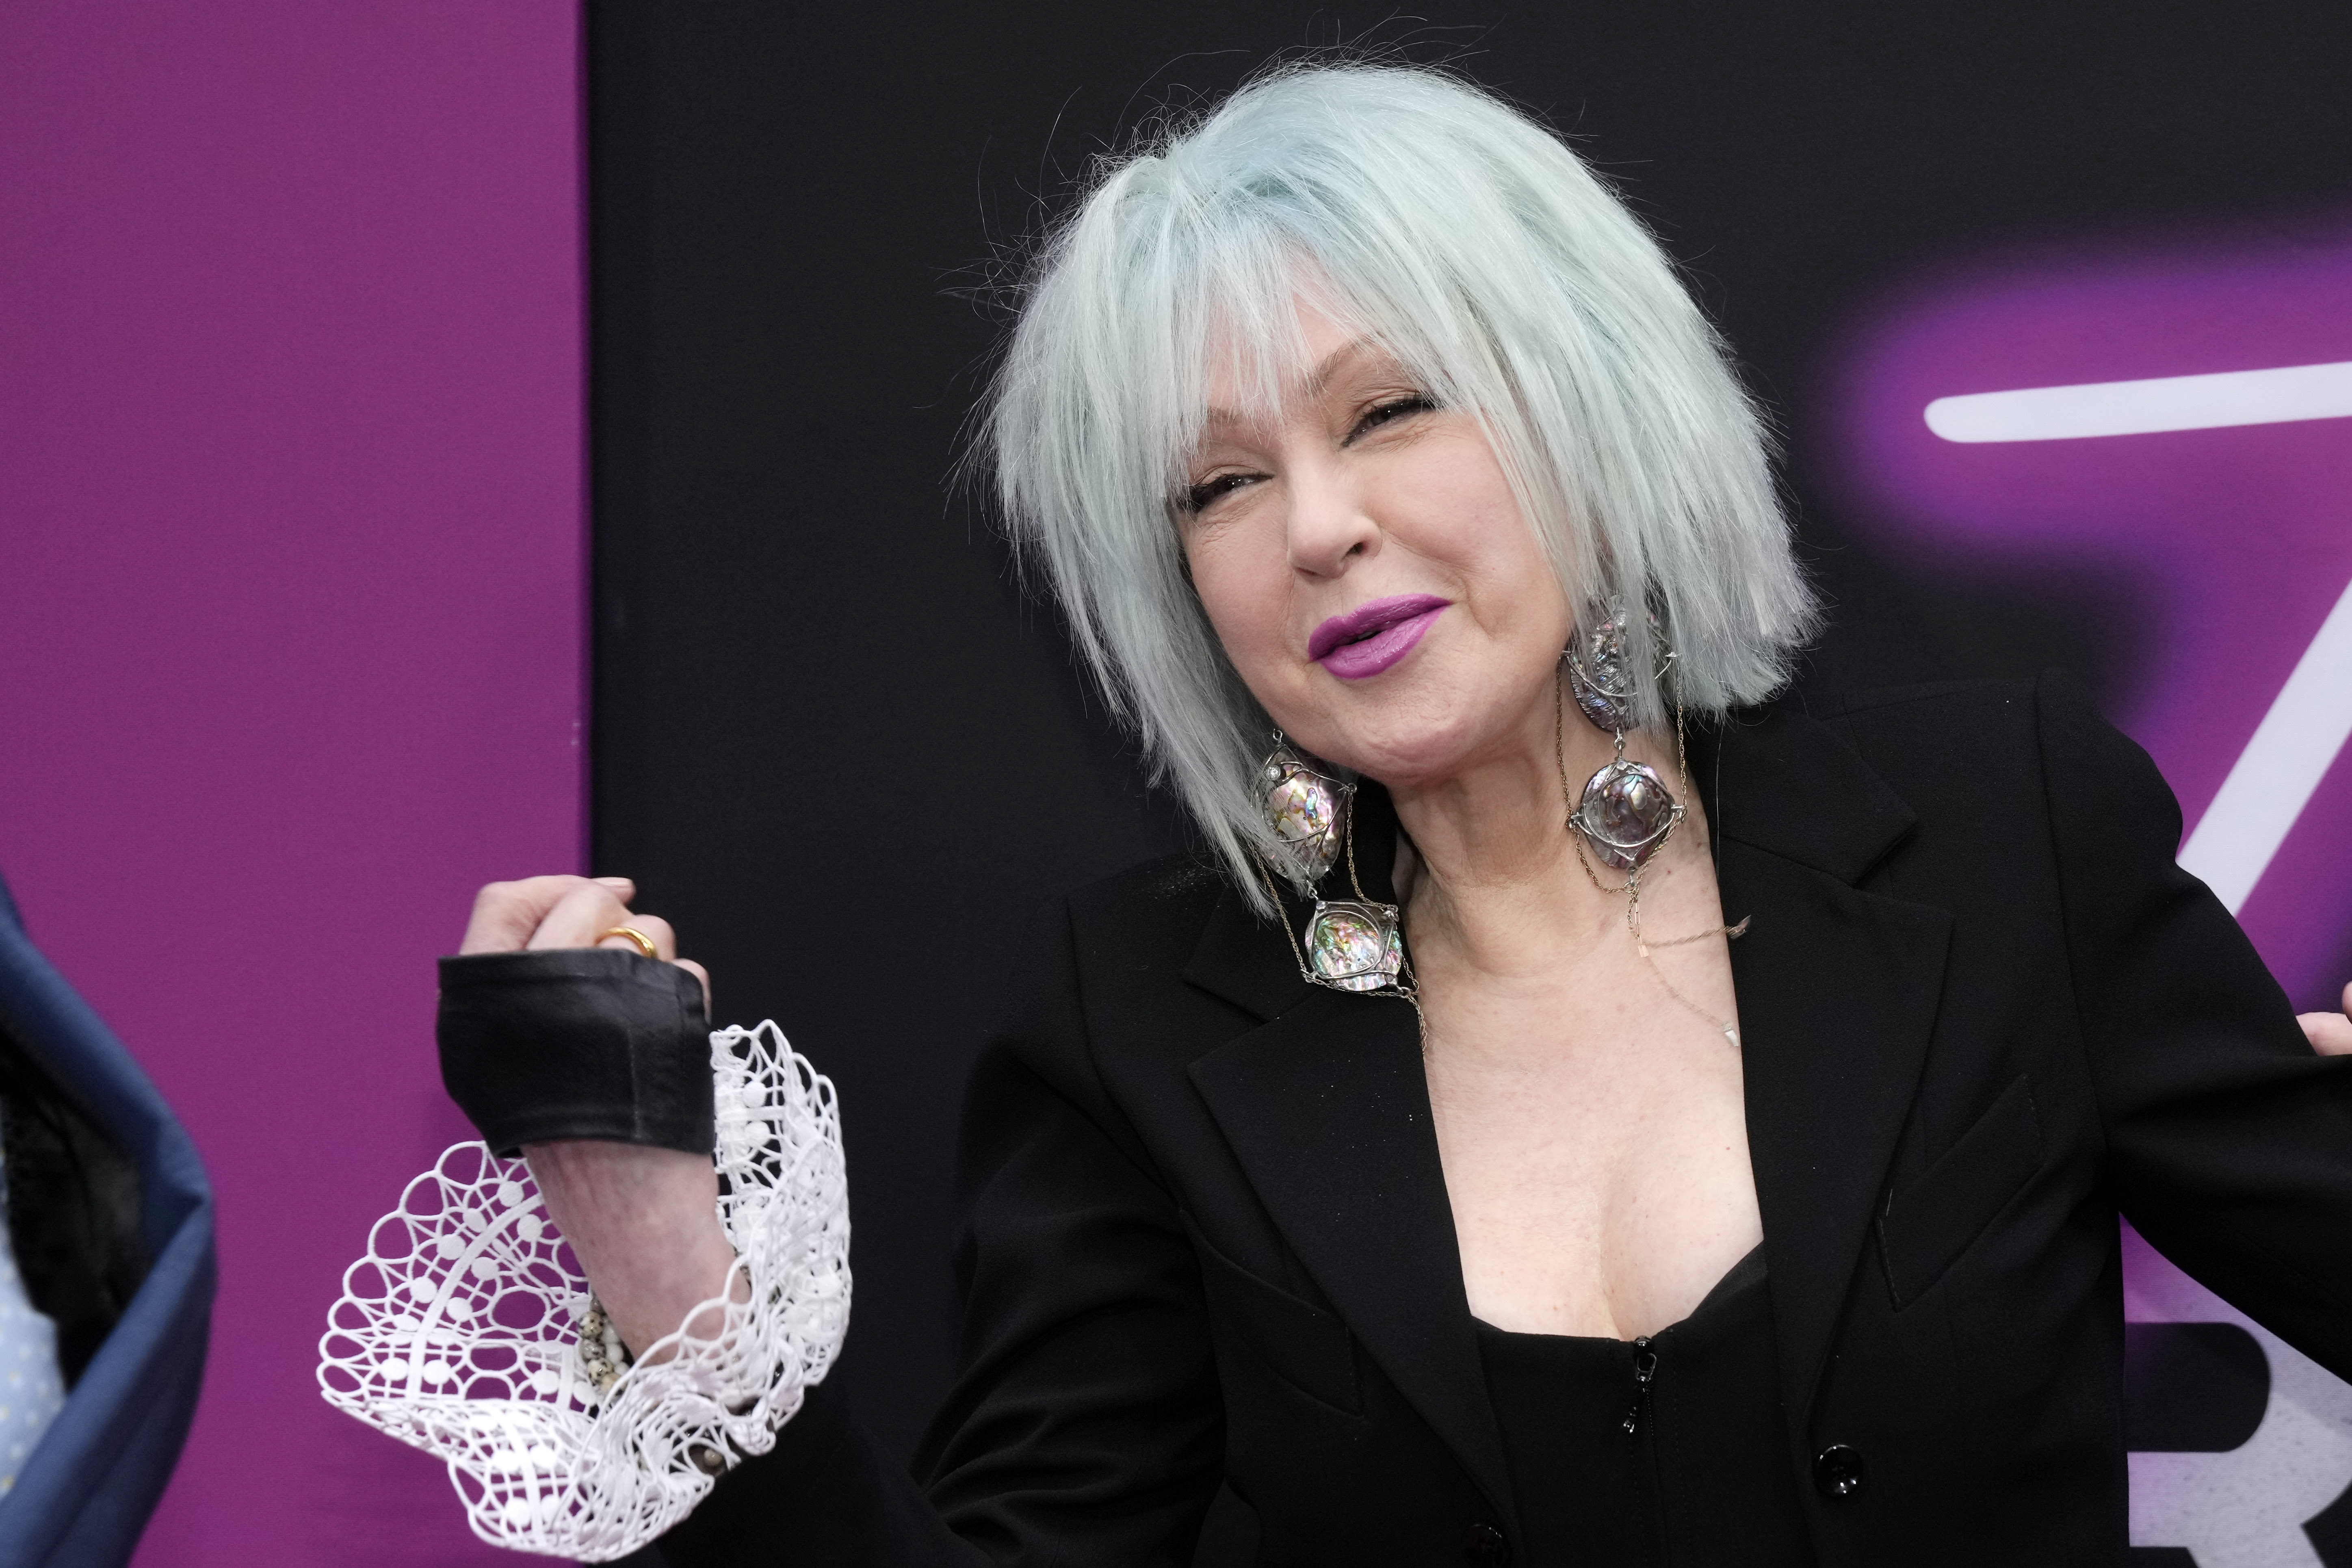 Cyndi Lauper sets four California shows as she plans to kick off farewell tour this fall